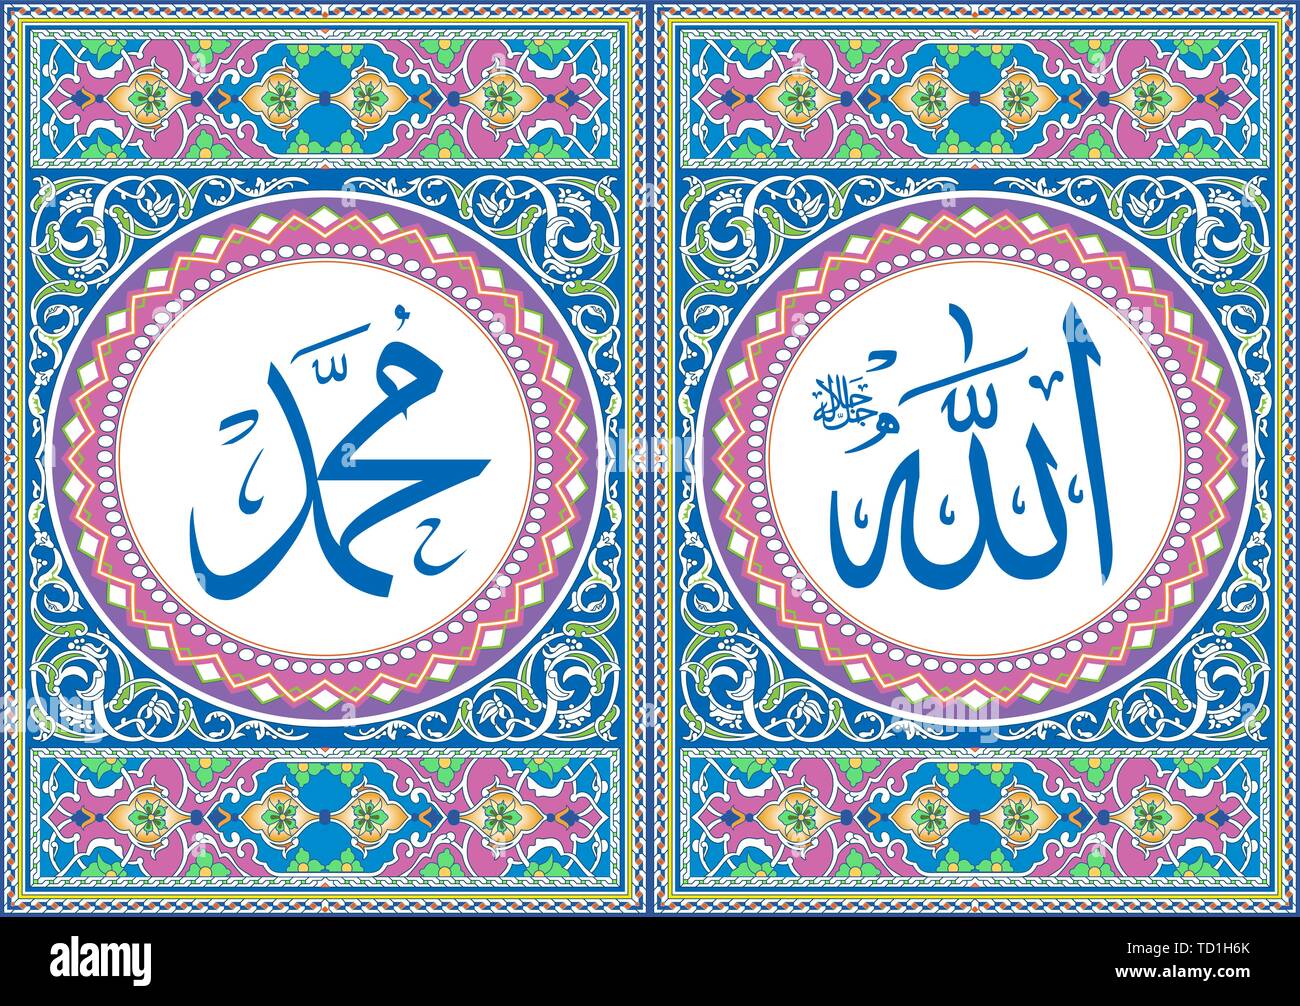 Allah in Arabic Text (God) at the Right Position & Muhammad in Arabic Text (The Prophet) at Left image position, Pop Art Color, Wall Art Printing Stock Vector